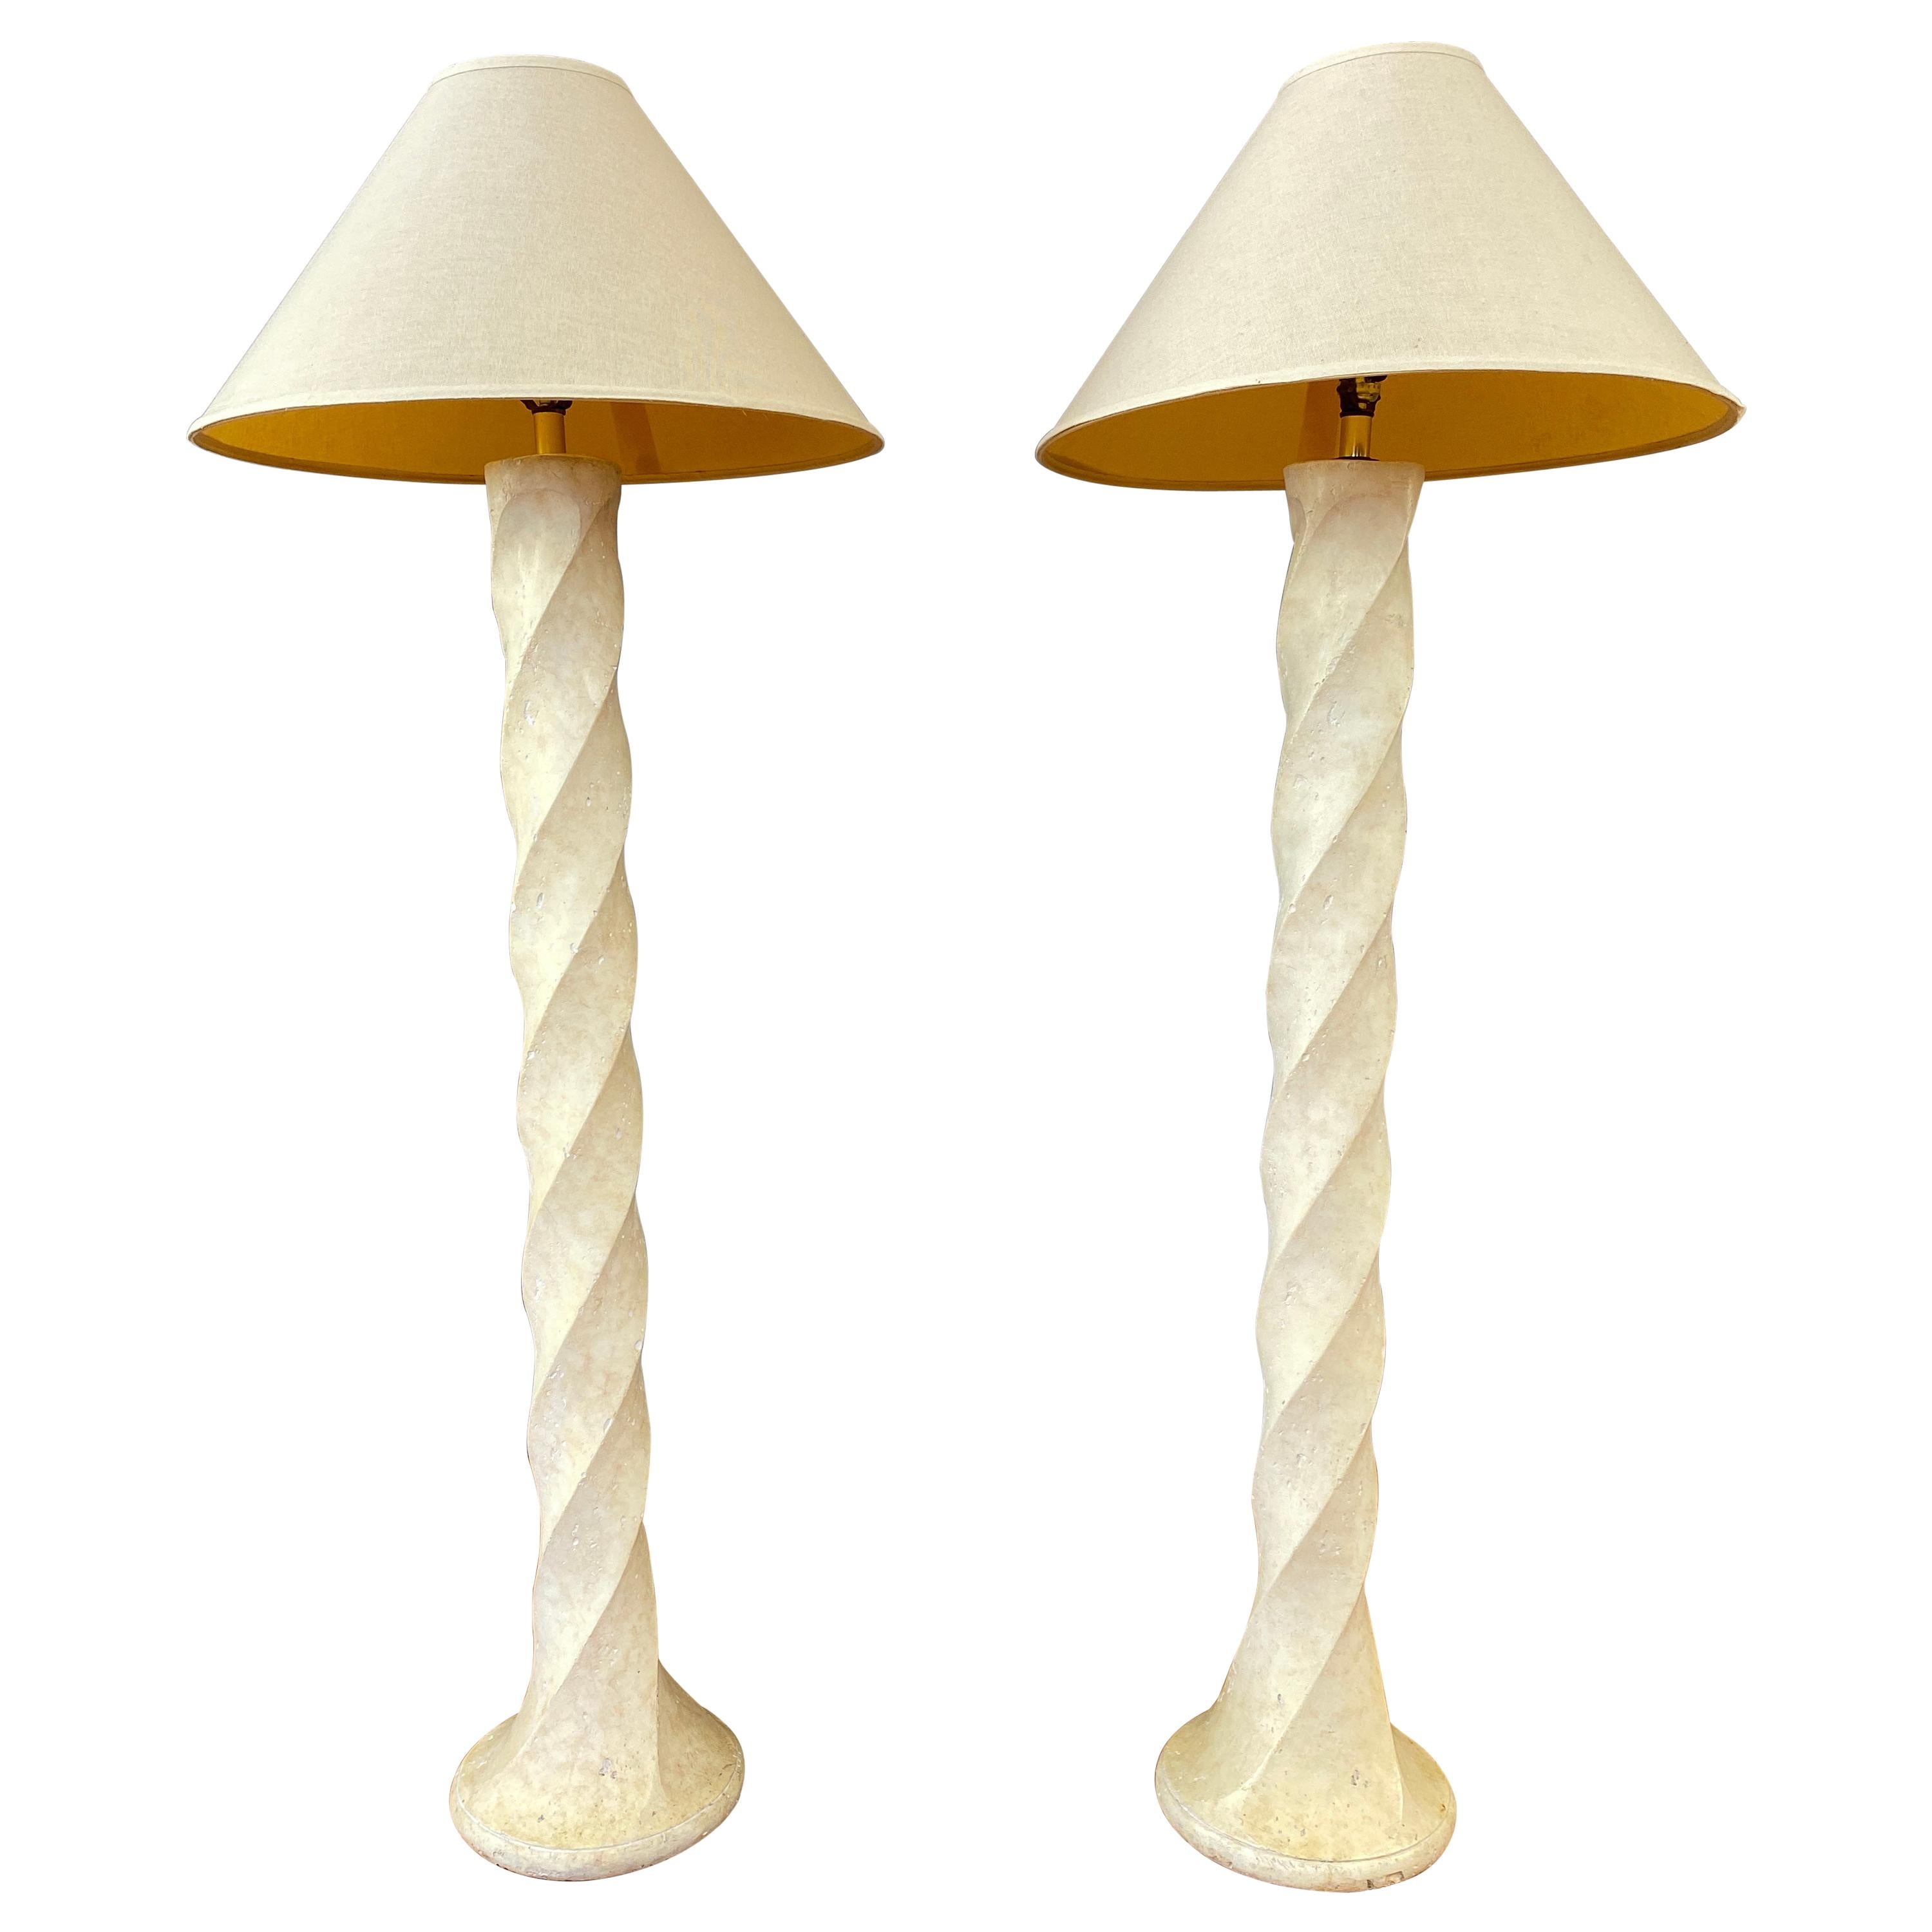 Pair of Michael Taylor Style Tall Spiral Plaster Floor Lamps